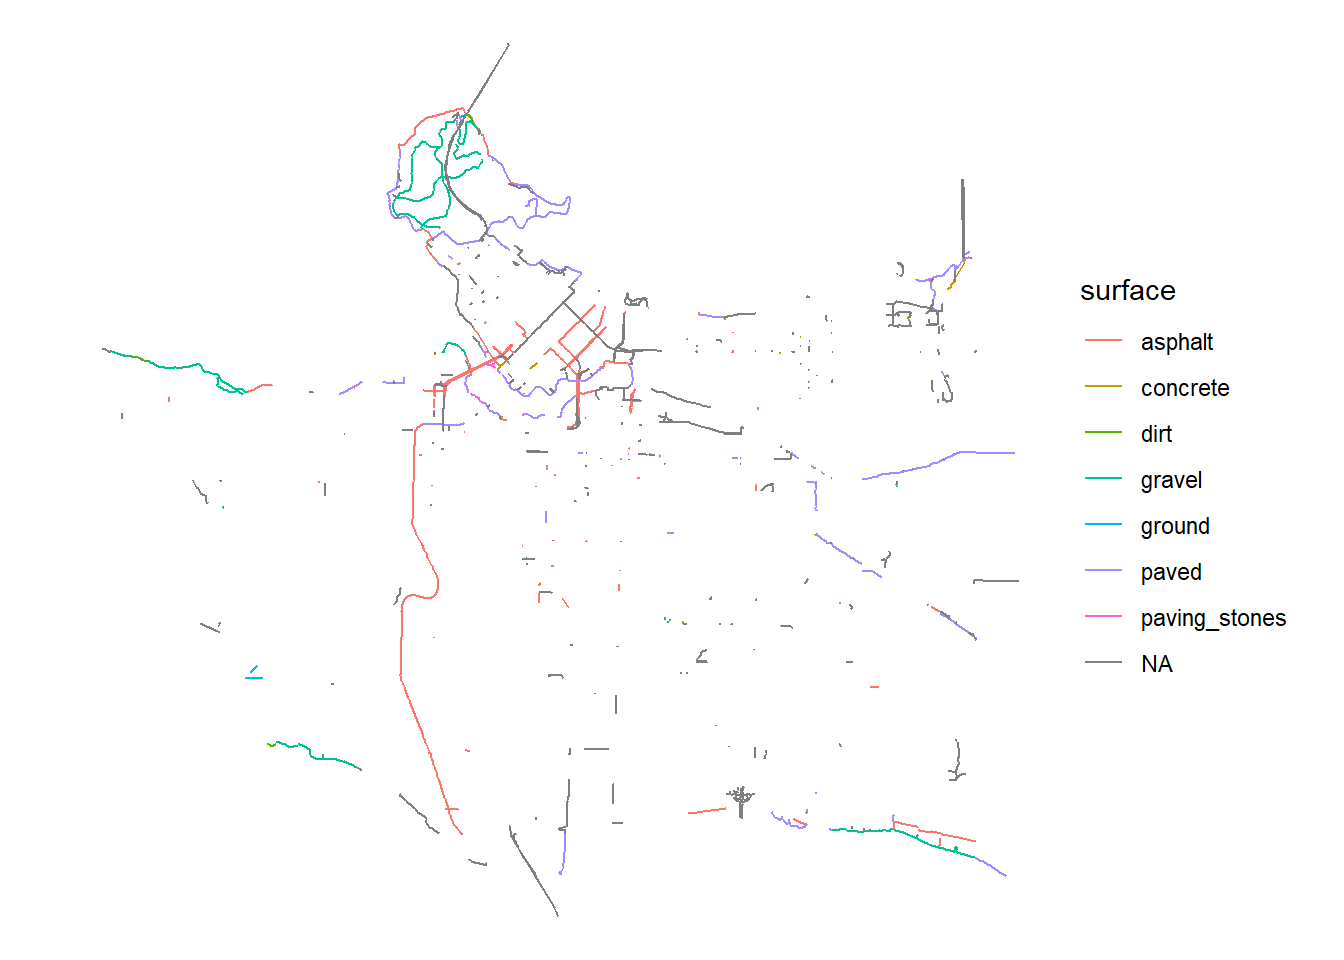 Mapping an attribute of the bicycling infrastructure vector data which describes the surface material.